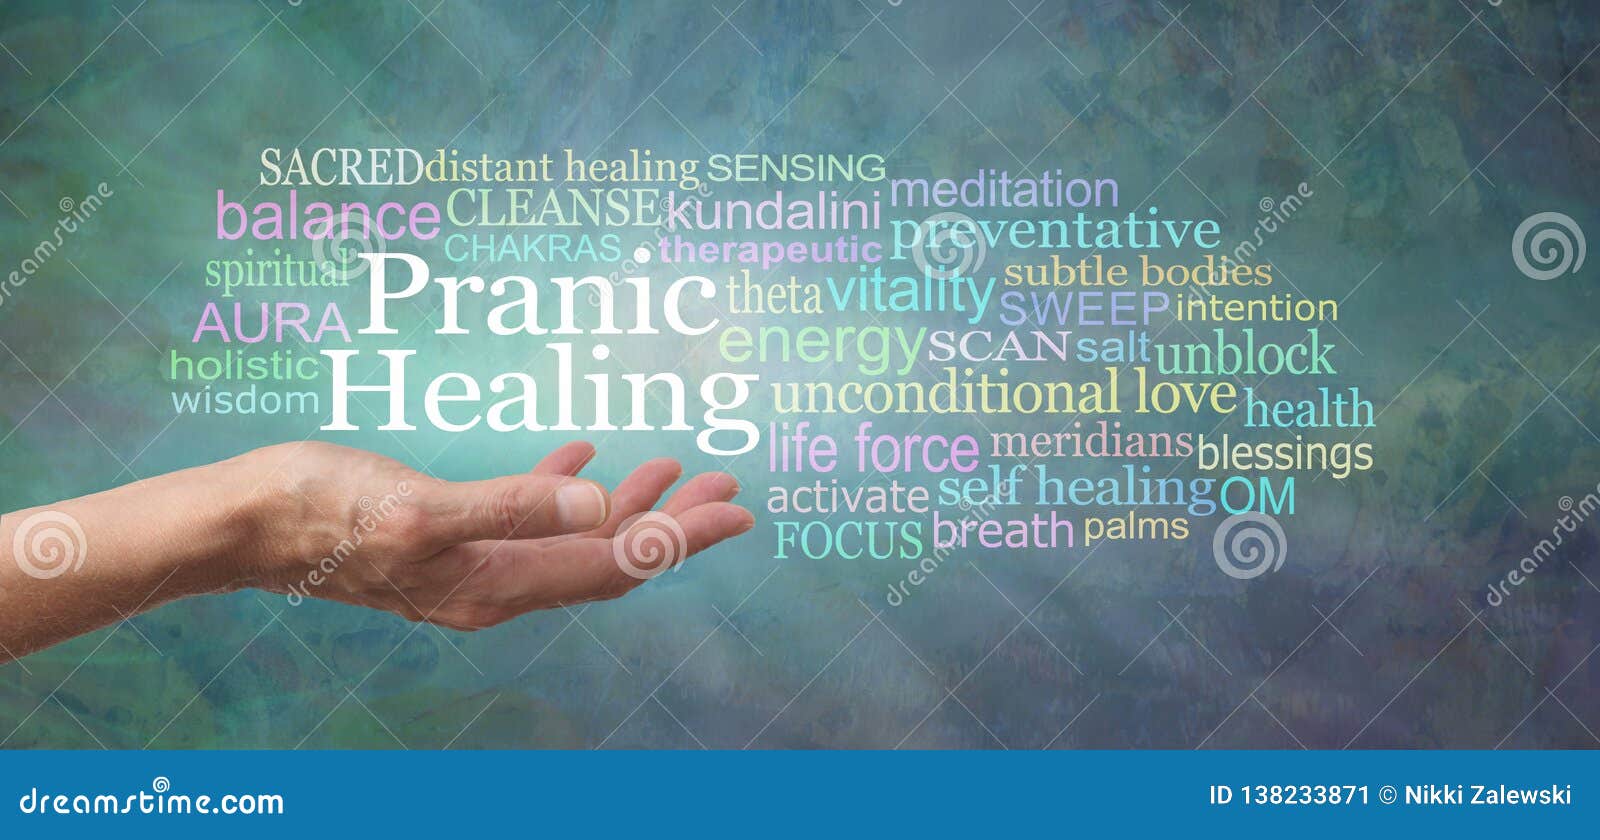 your body is ed to self heal - try pranic healing